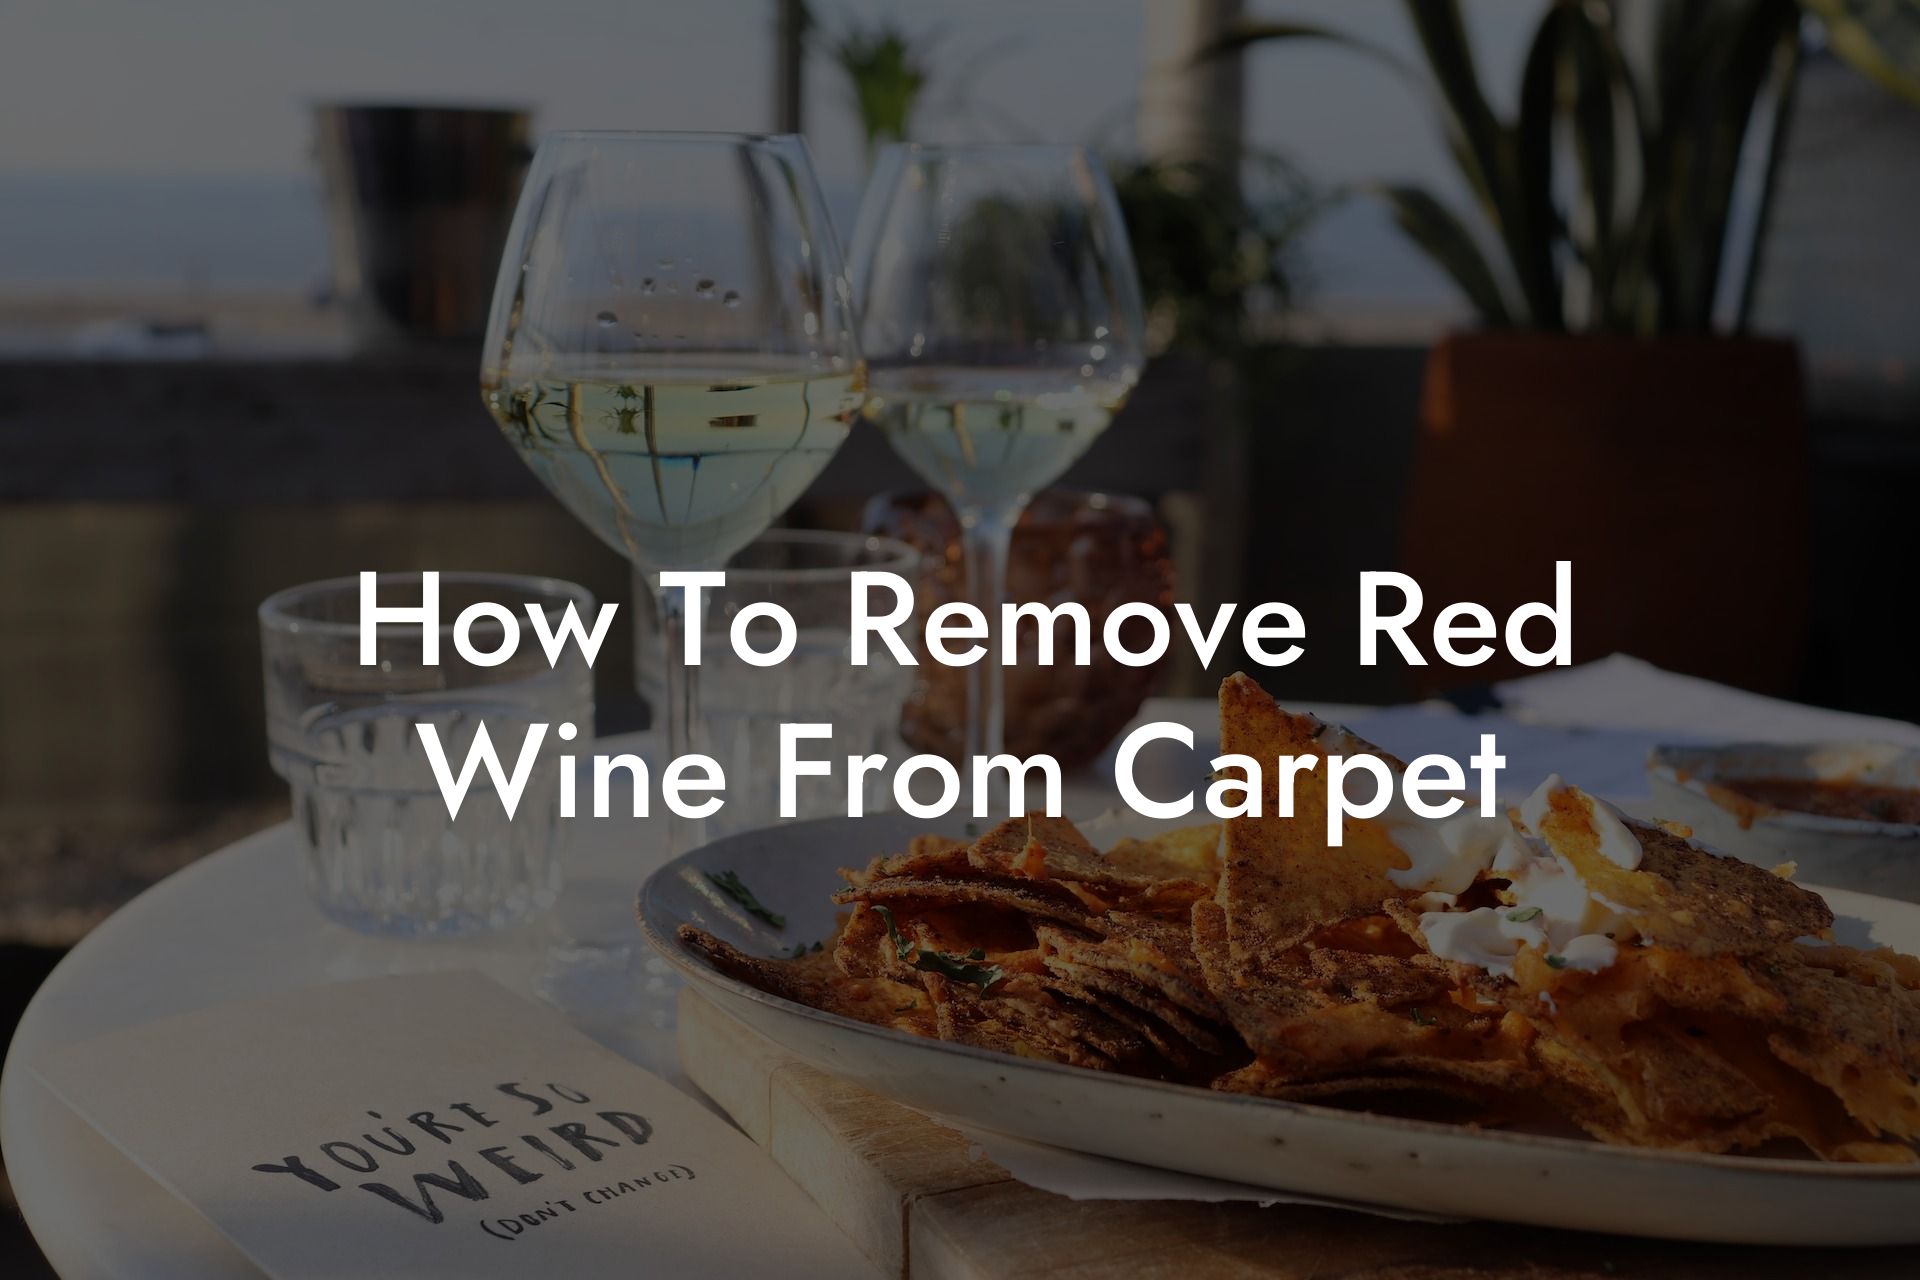 How To Remove Red Wine From Carpet